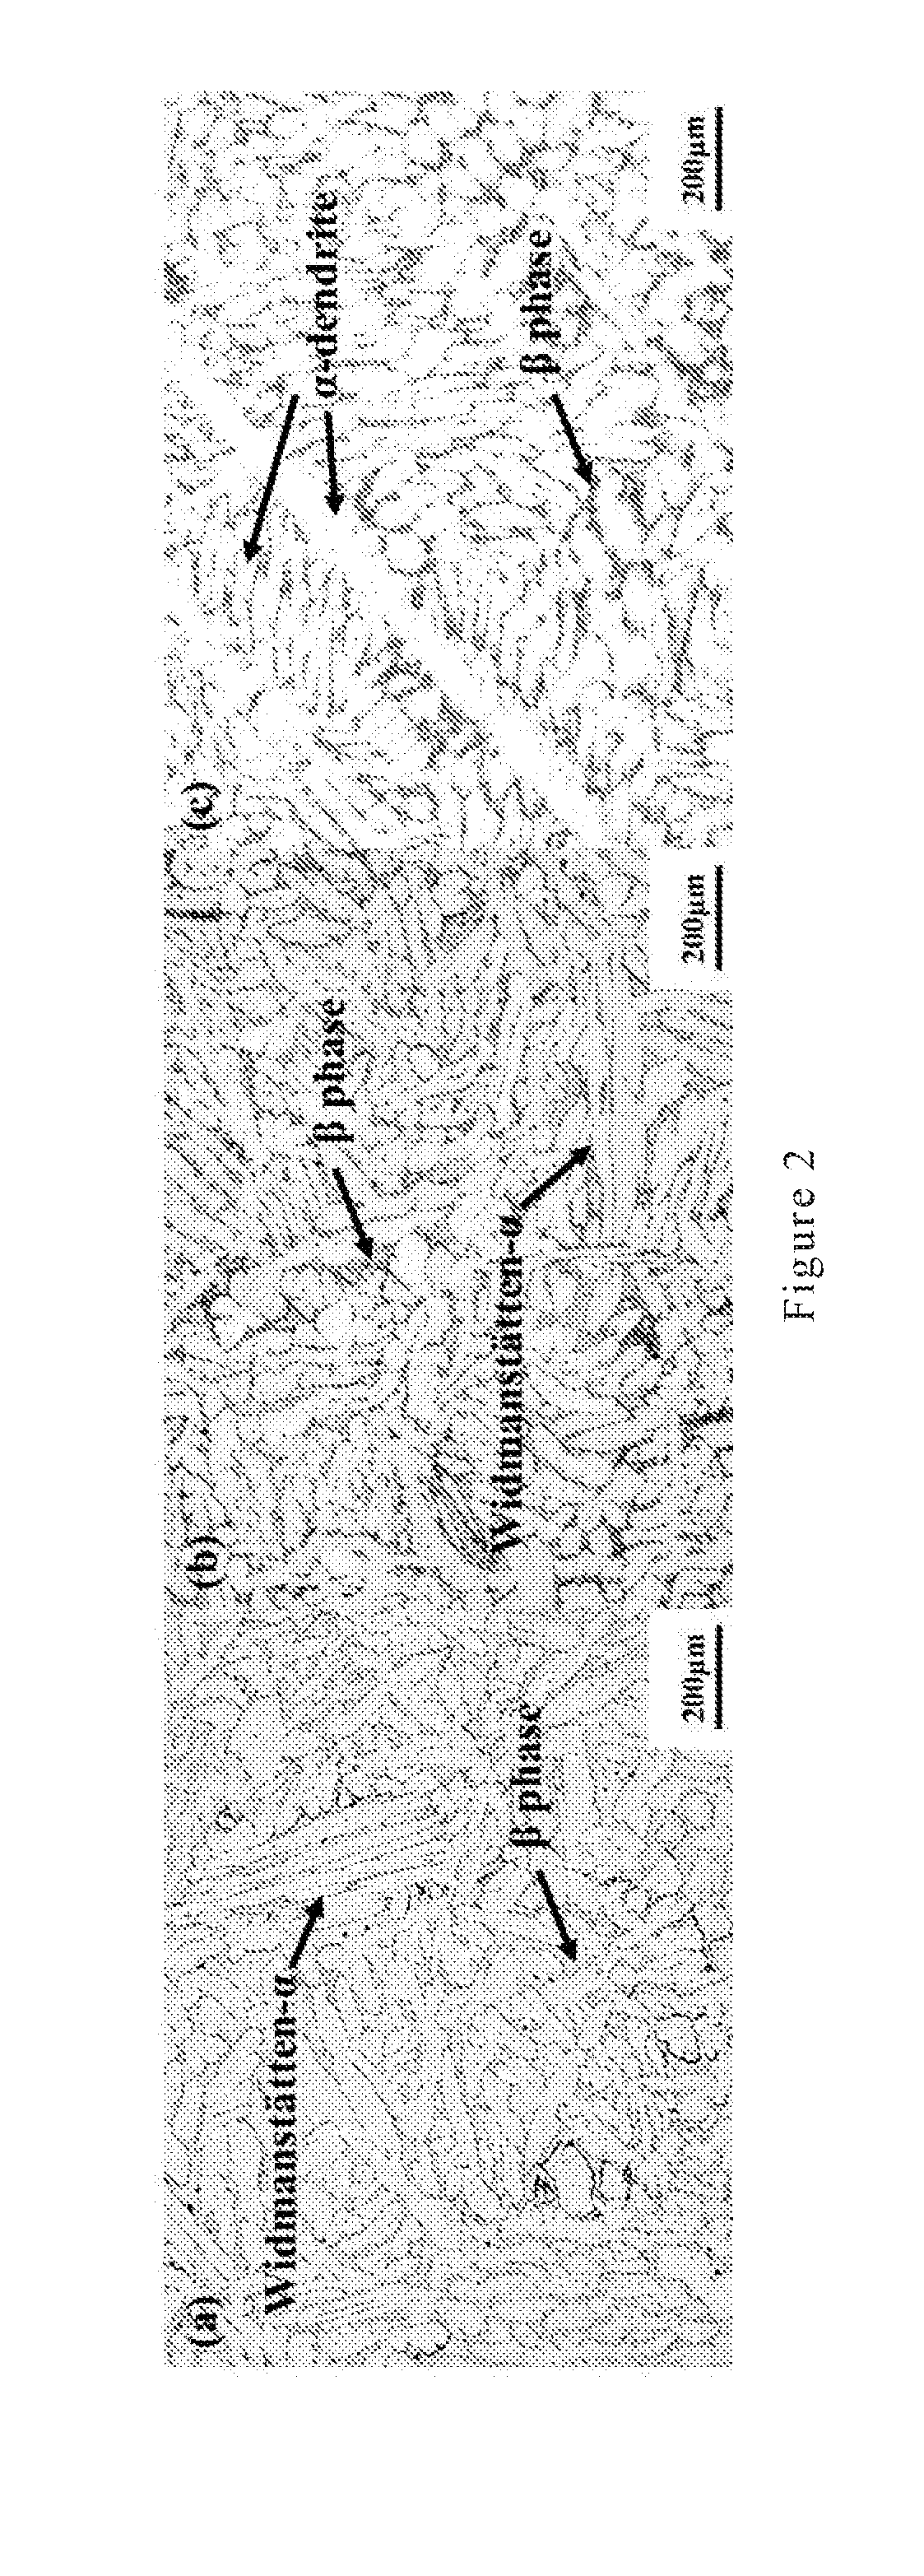 Unleaded free-cutting brass alloys with excellent castability, method for producing the same, and application thereof